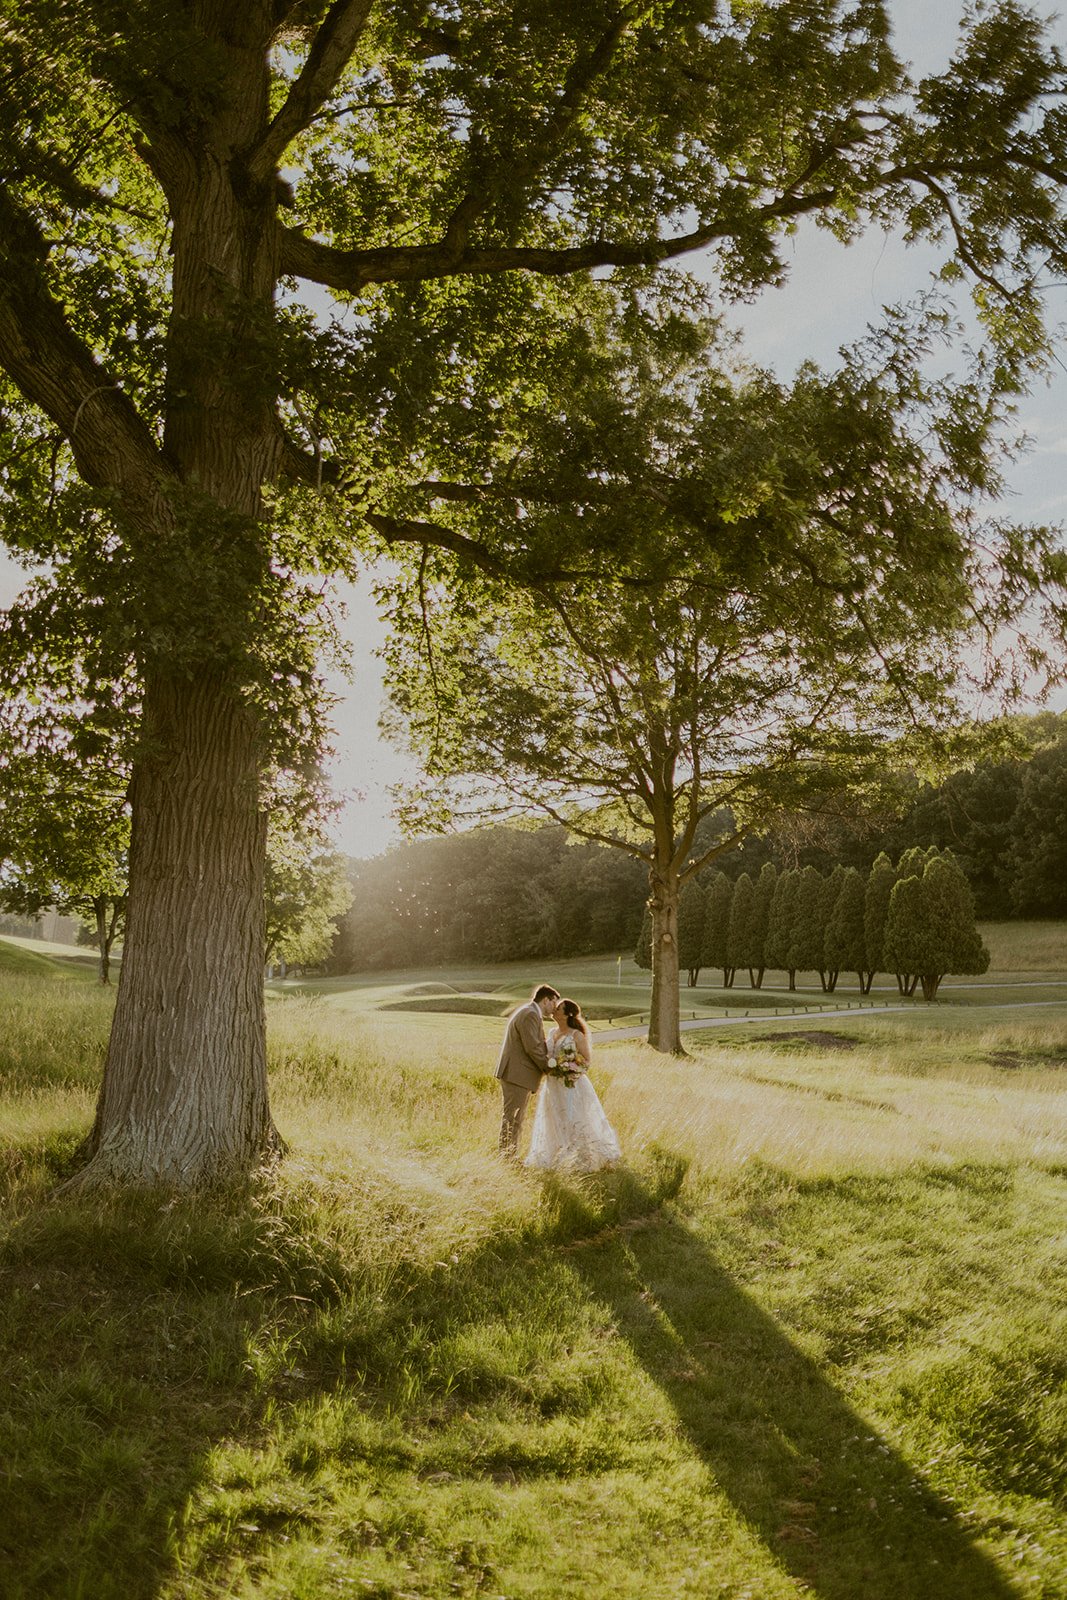 Bride and groom share a kiss by a tree during the golden hour.